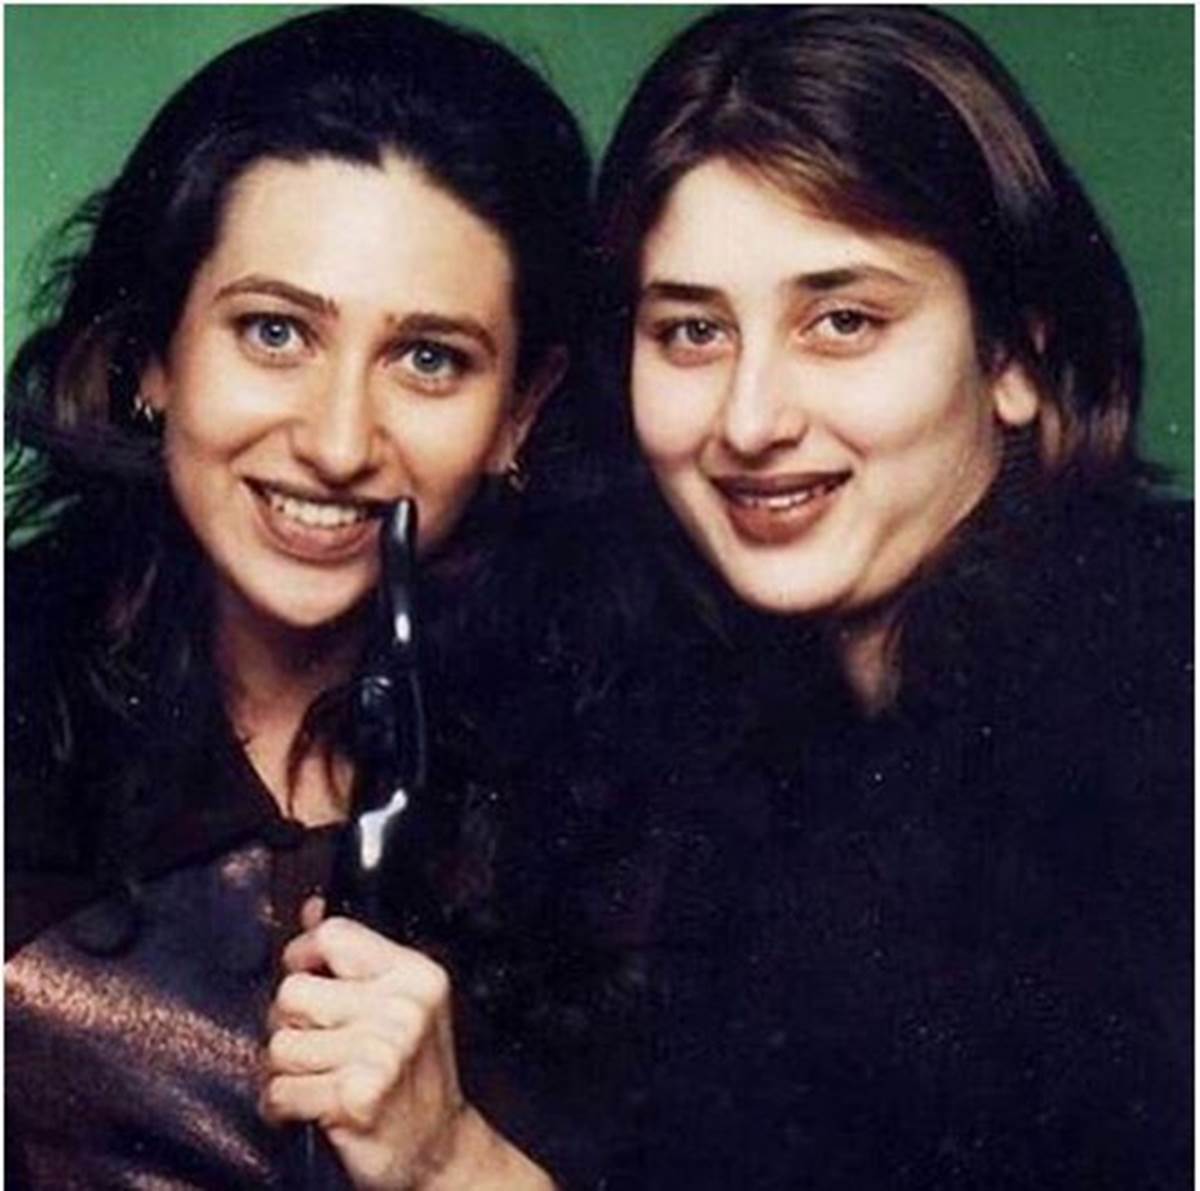 Karisma And Kareena Kapoor S Throwback Image Is The Cutest Thing You Will See Today Entertainment News The Indian Express